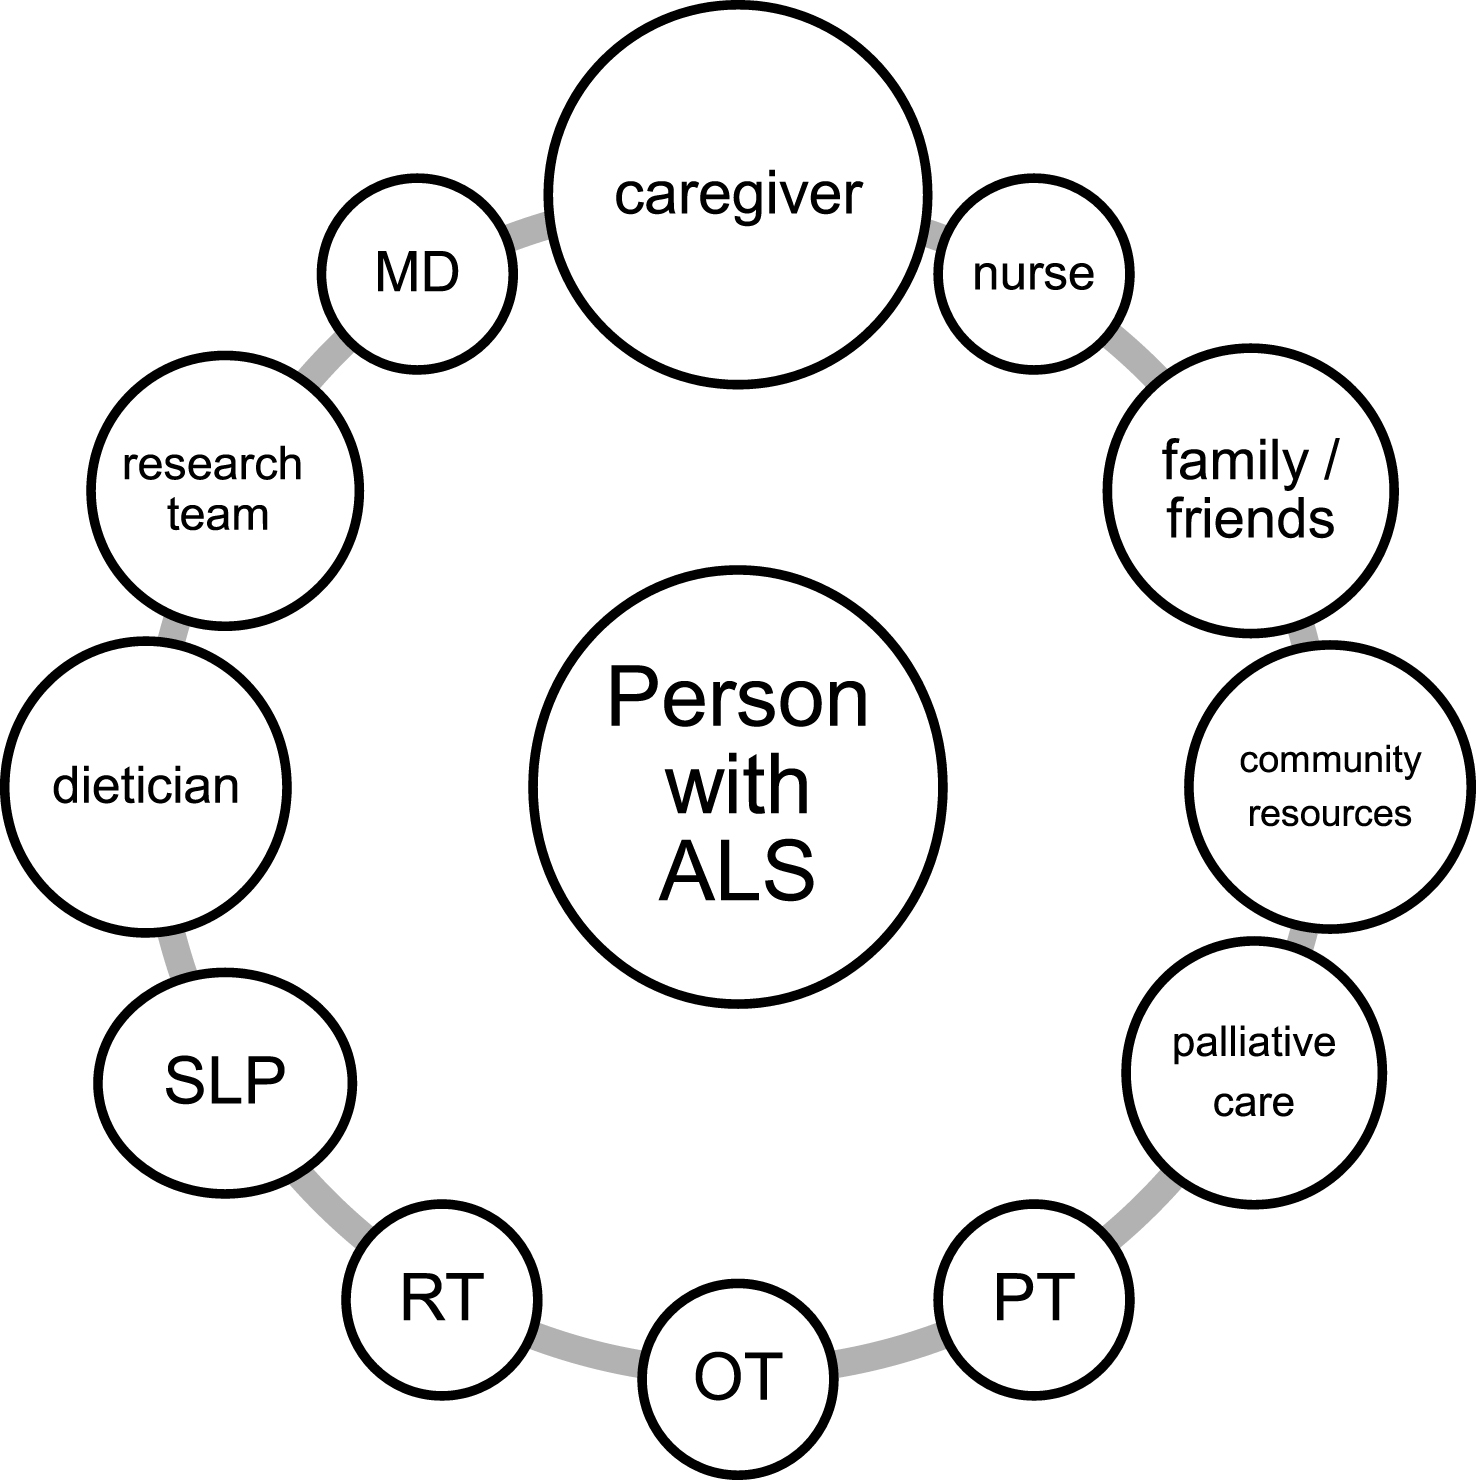 A model of person-centered multidisciplinary network of care. Abbreviations: MD: medical doctor; PT: physical therapist; OT: occupational therapist; RT: respiratory therapist; SLP: speech and language pathologist.